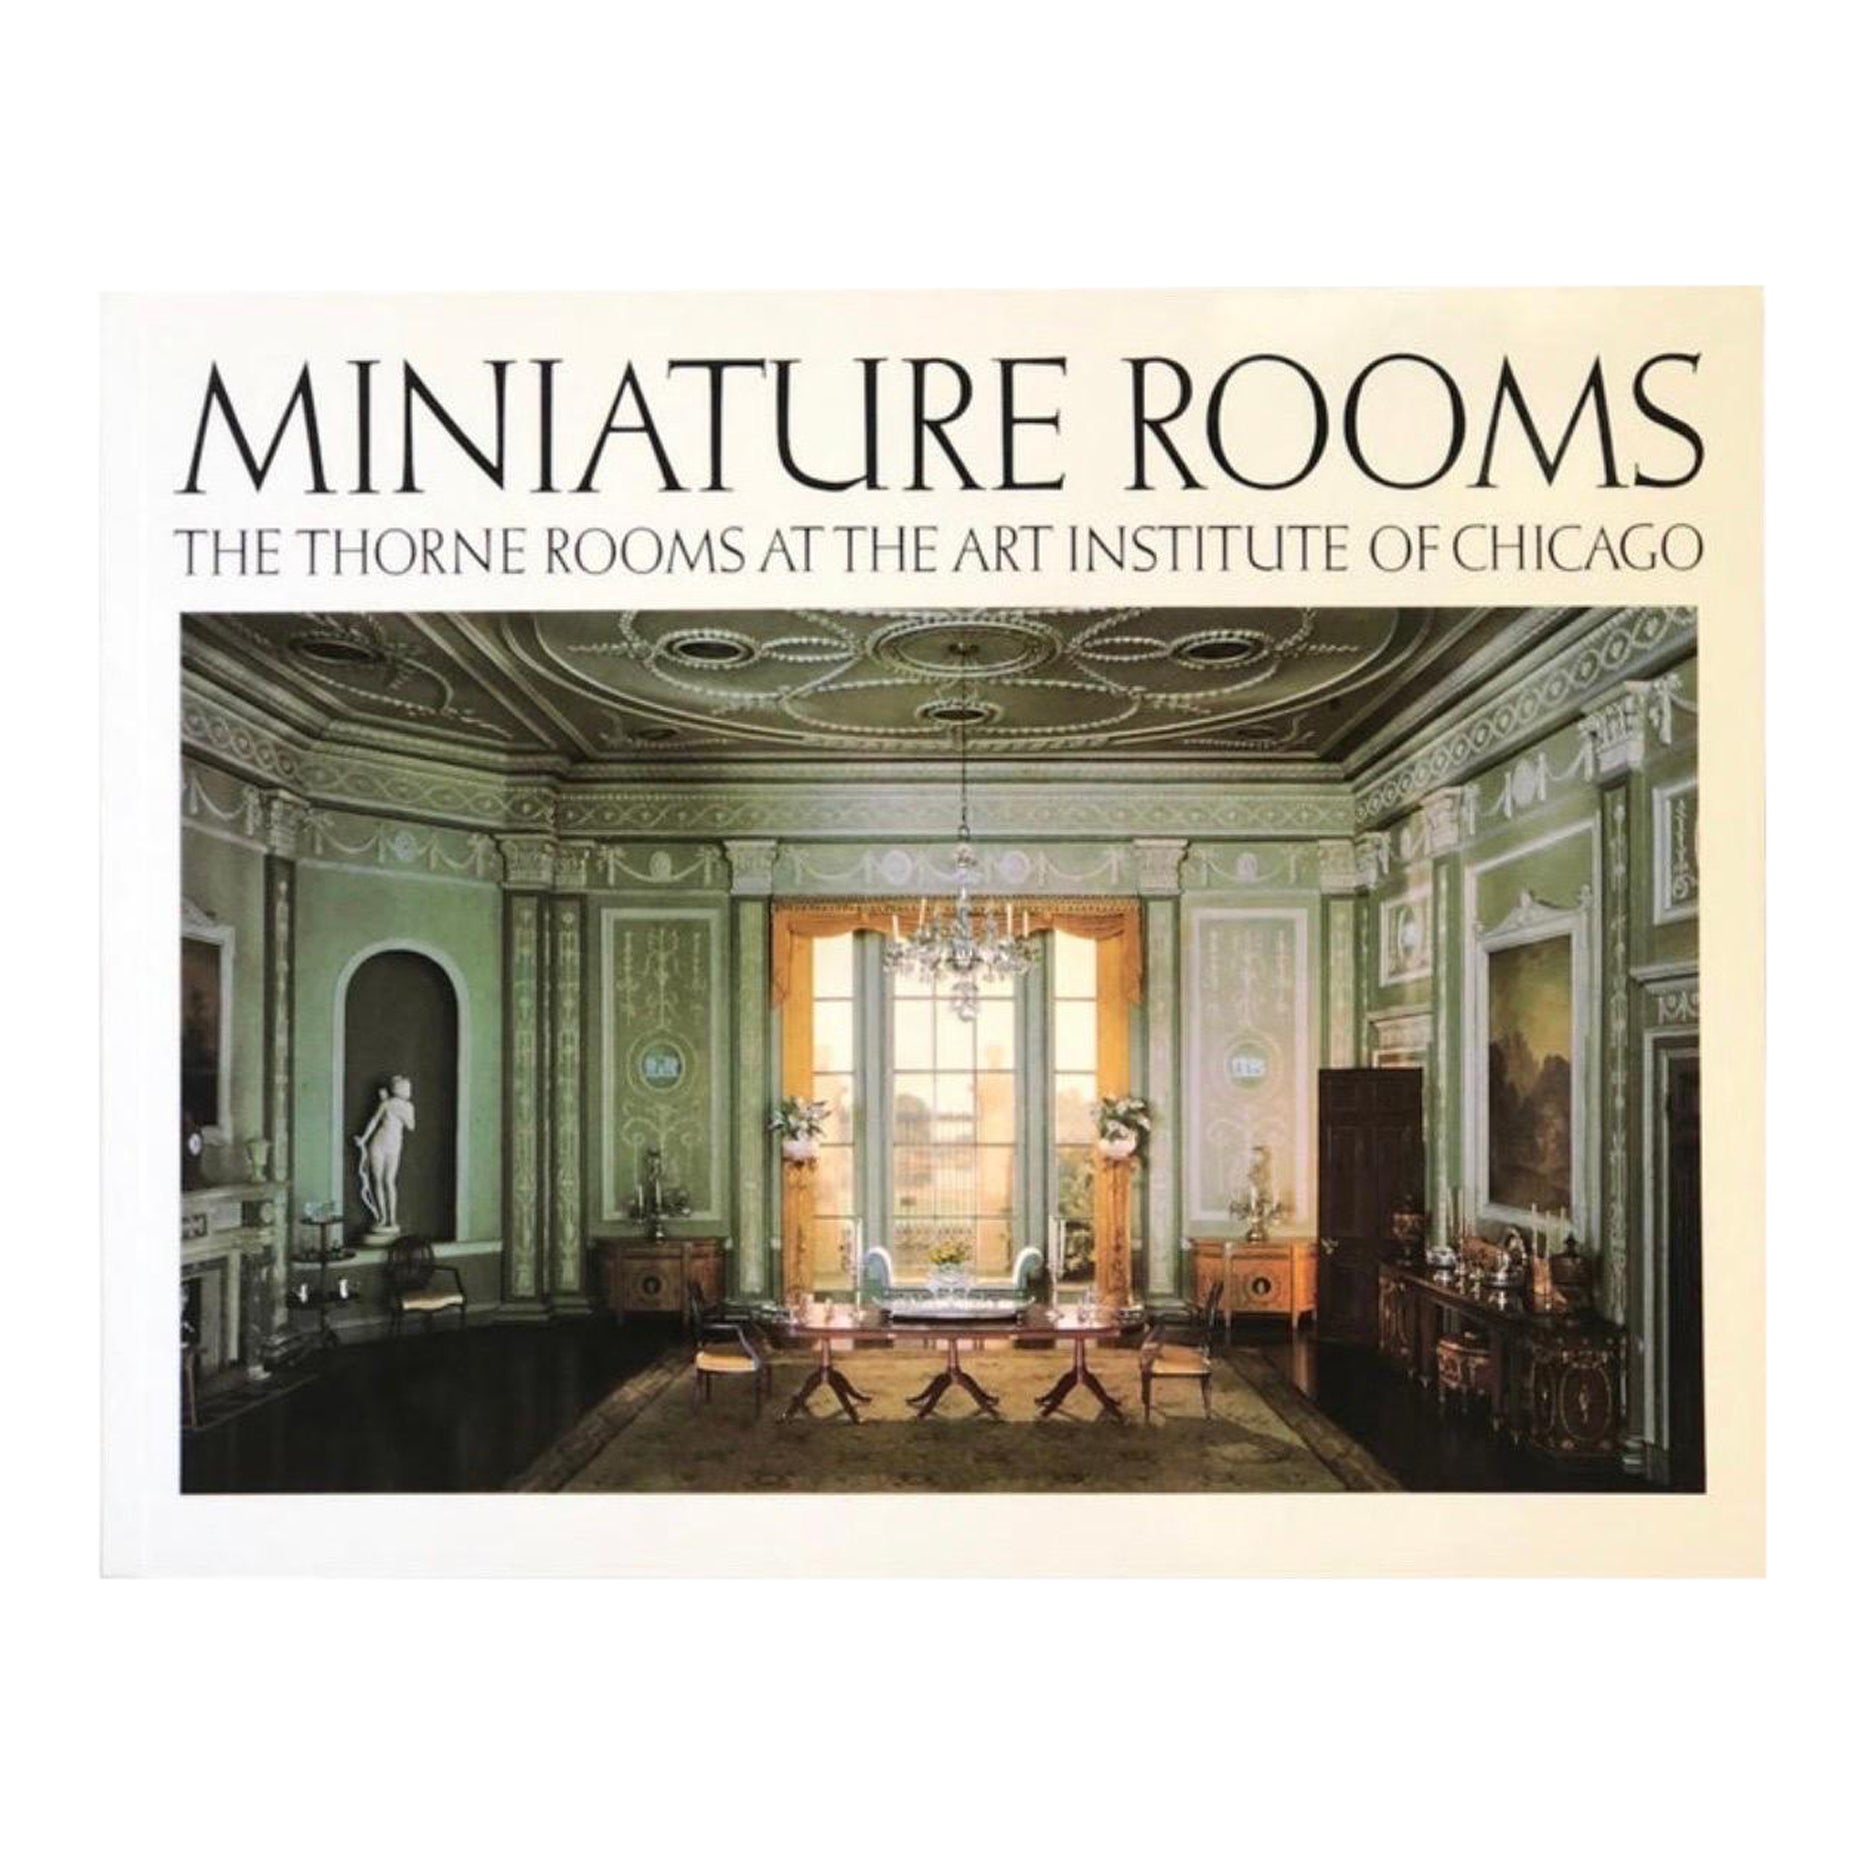 Miniature Rooms, the Thorne Rooms at the Art Institute of Chicago For Sale